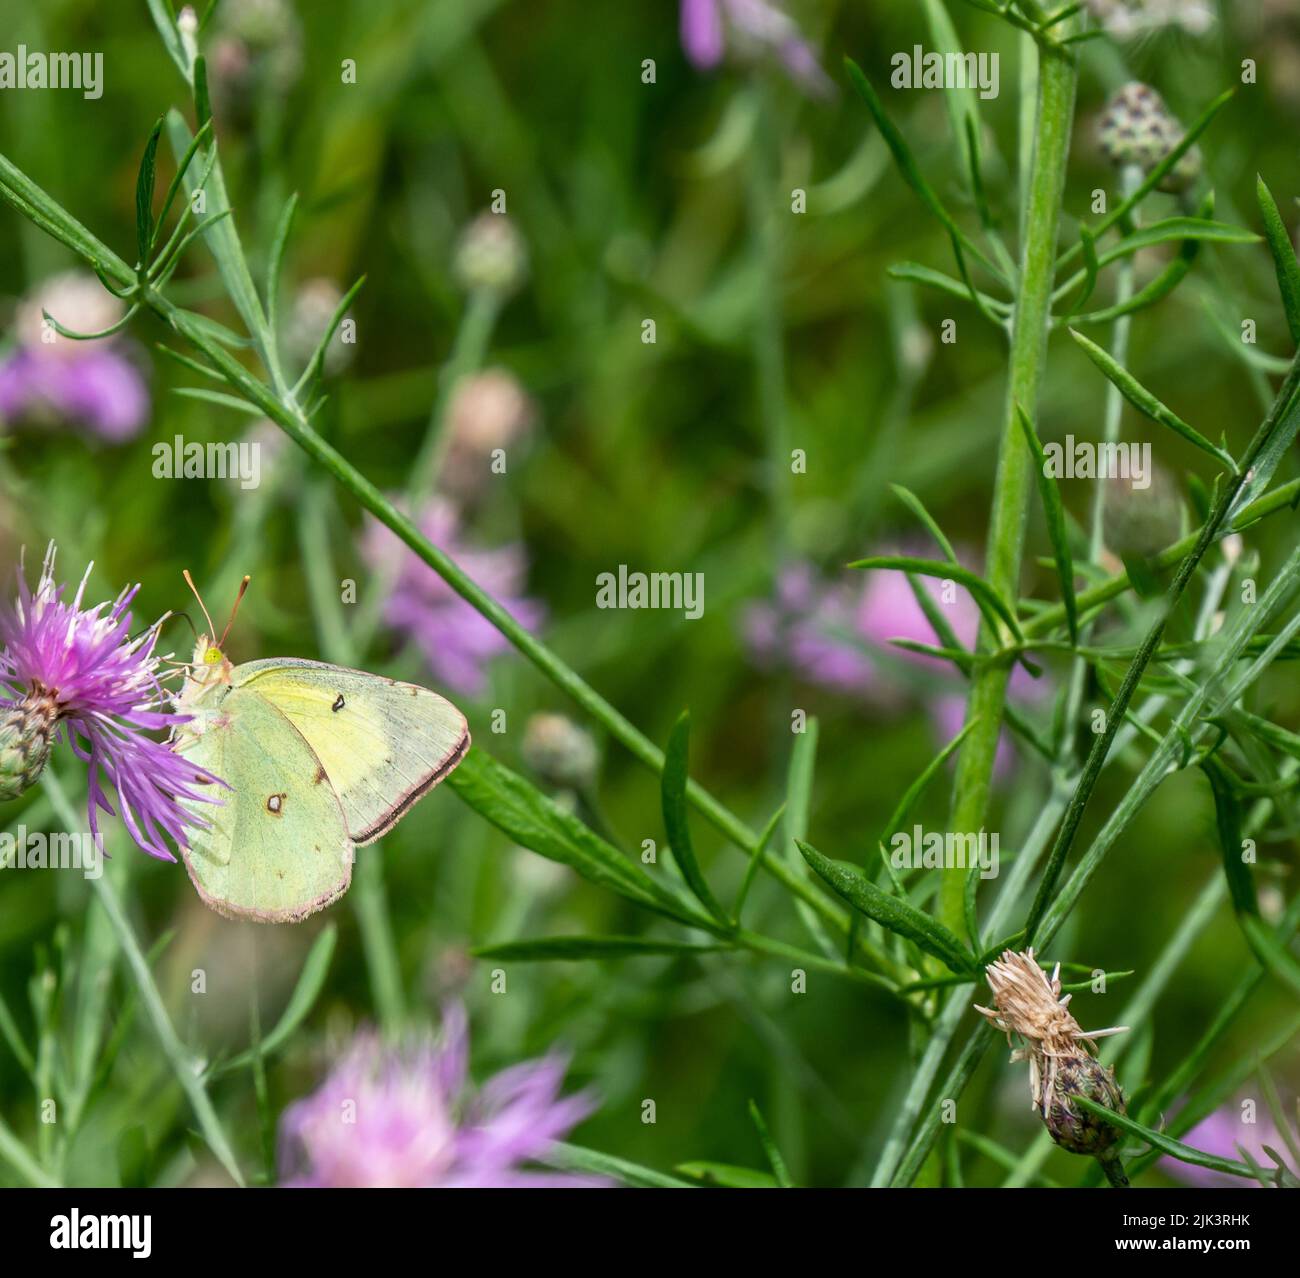 Close-up of a clouded sulphur butterfly collecting nectar from the purple flower on a creeping thistle plant that is growing in a field. Stock Photo